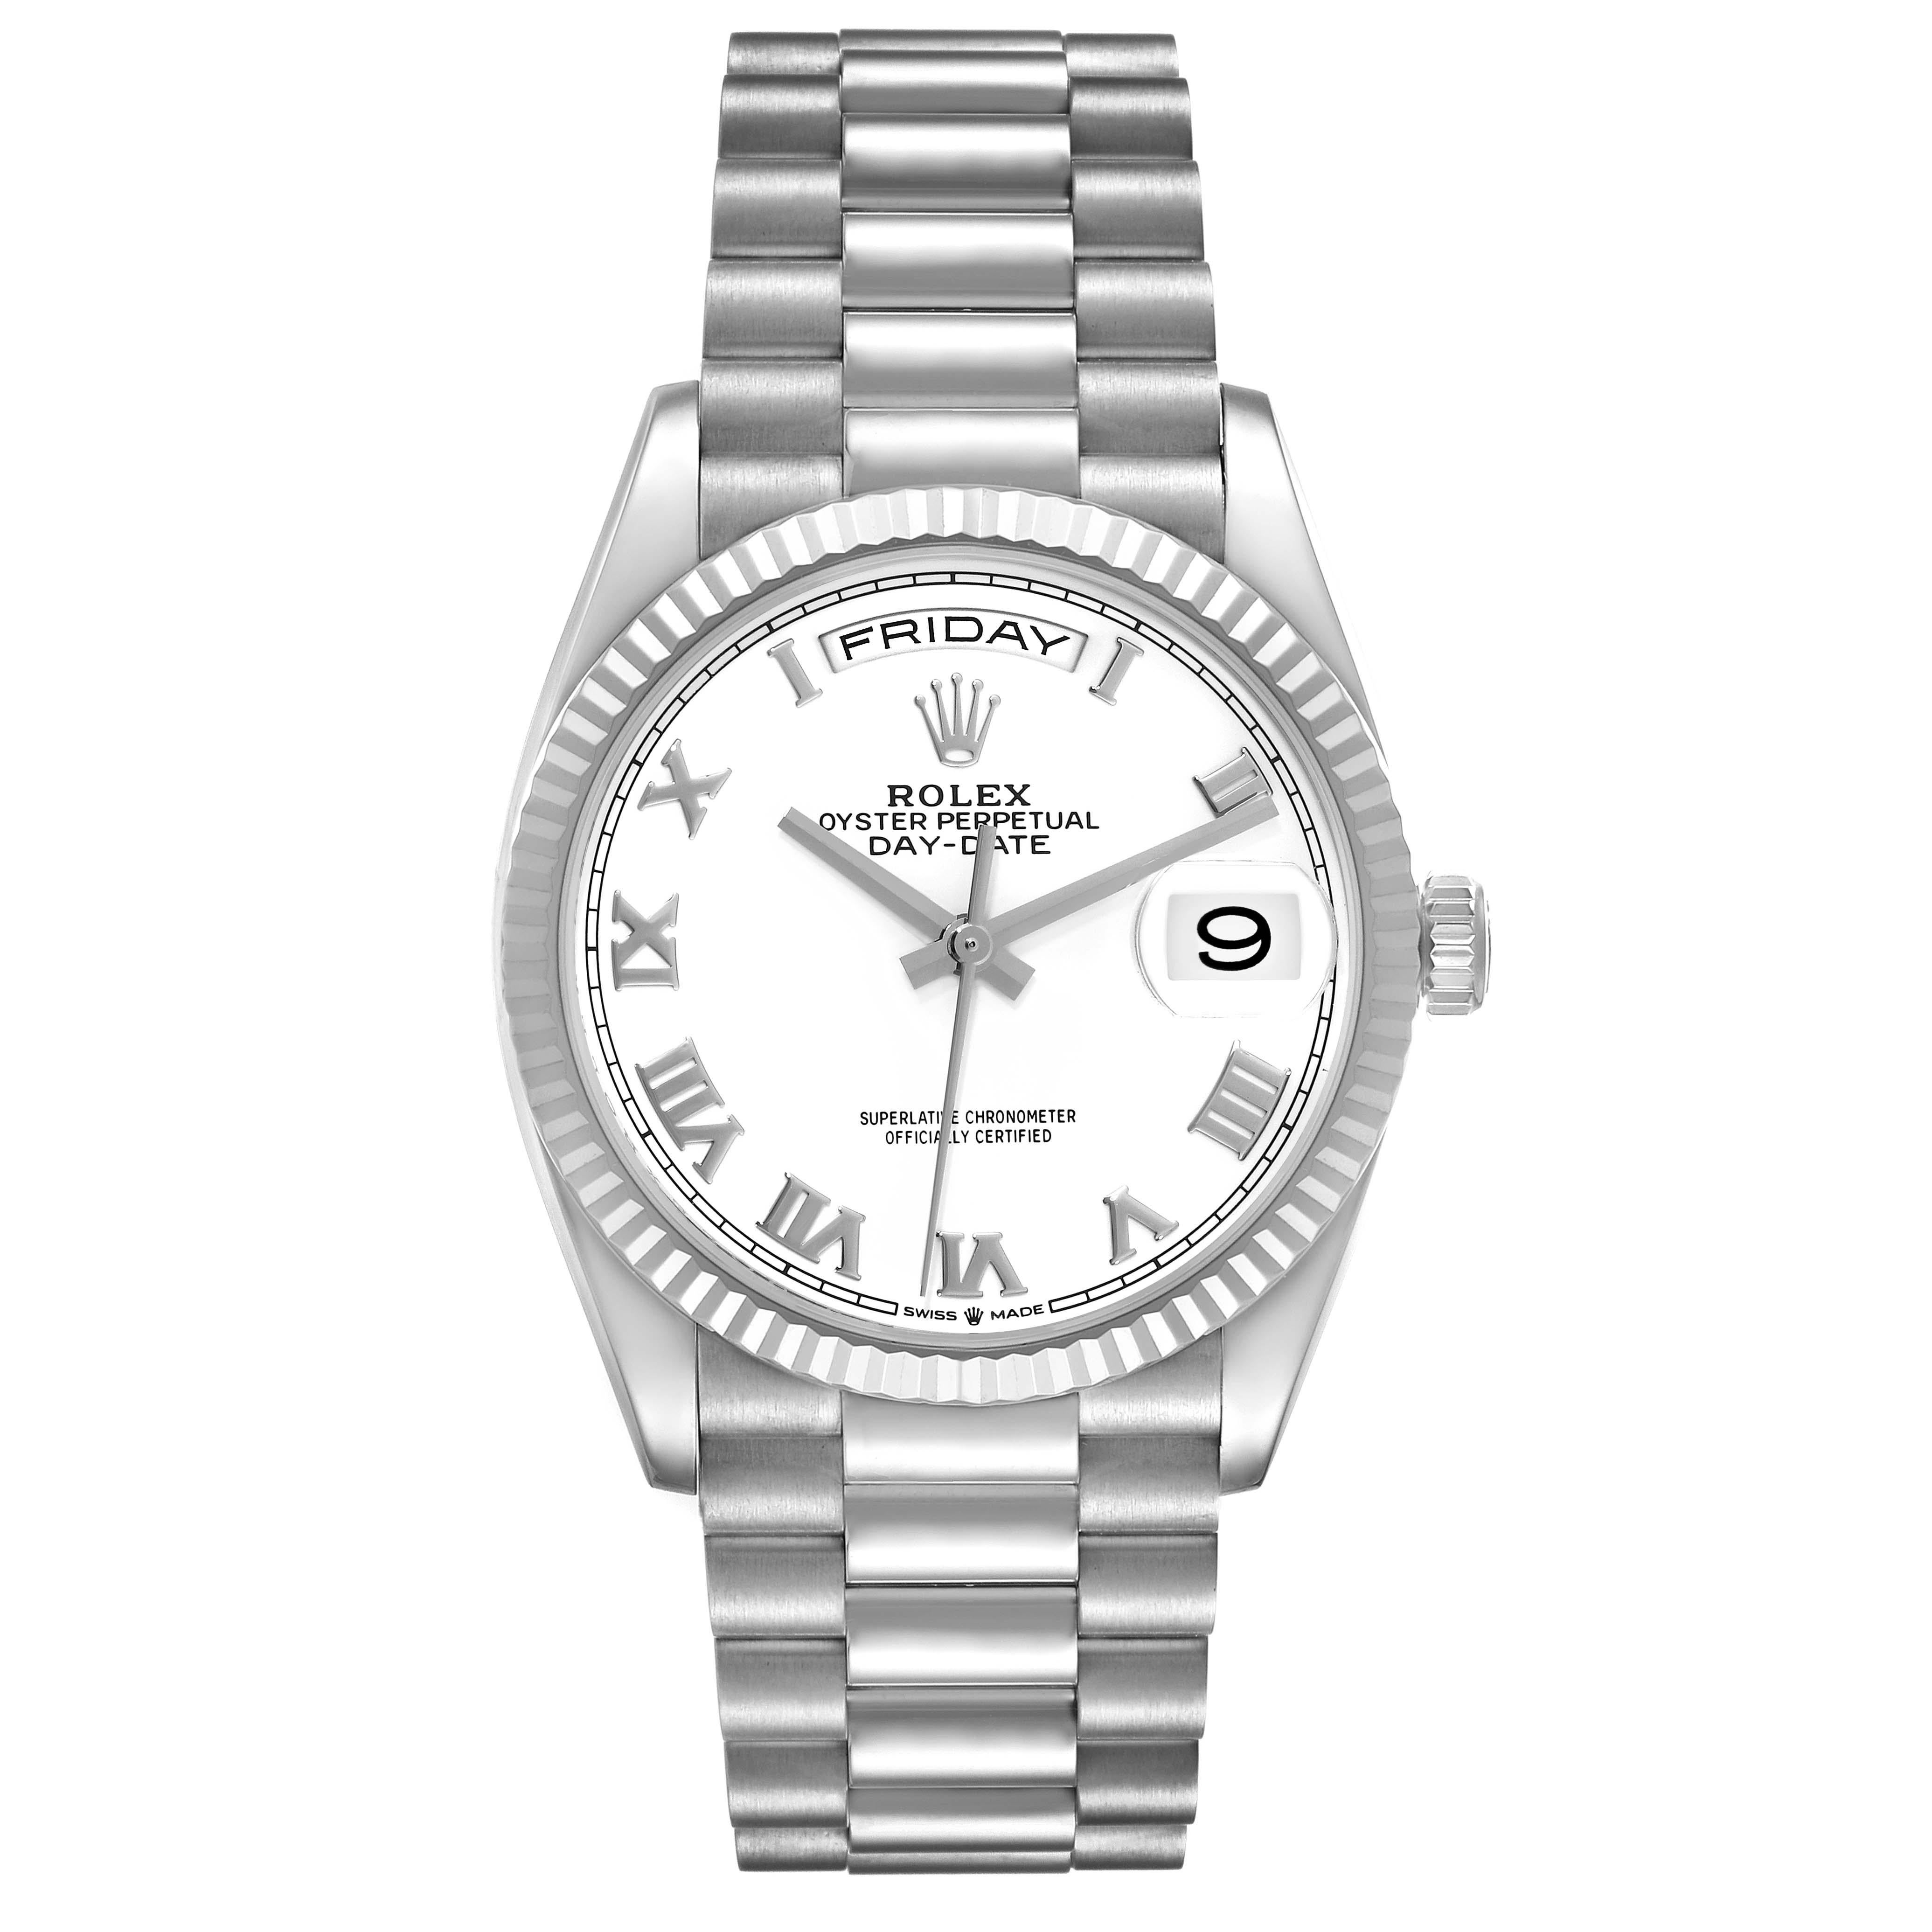 Rolex Day Date 36mm President White Gold White Dial Mens Watch 128239 Box Card For Sale 4